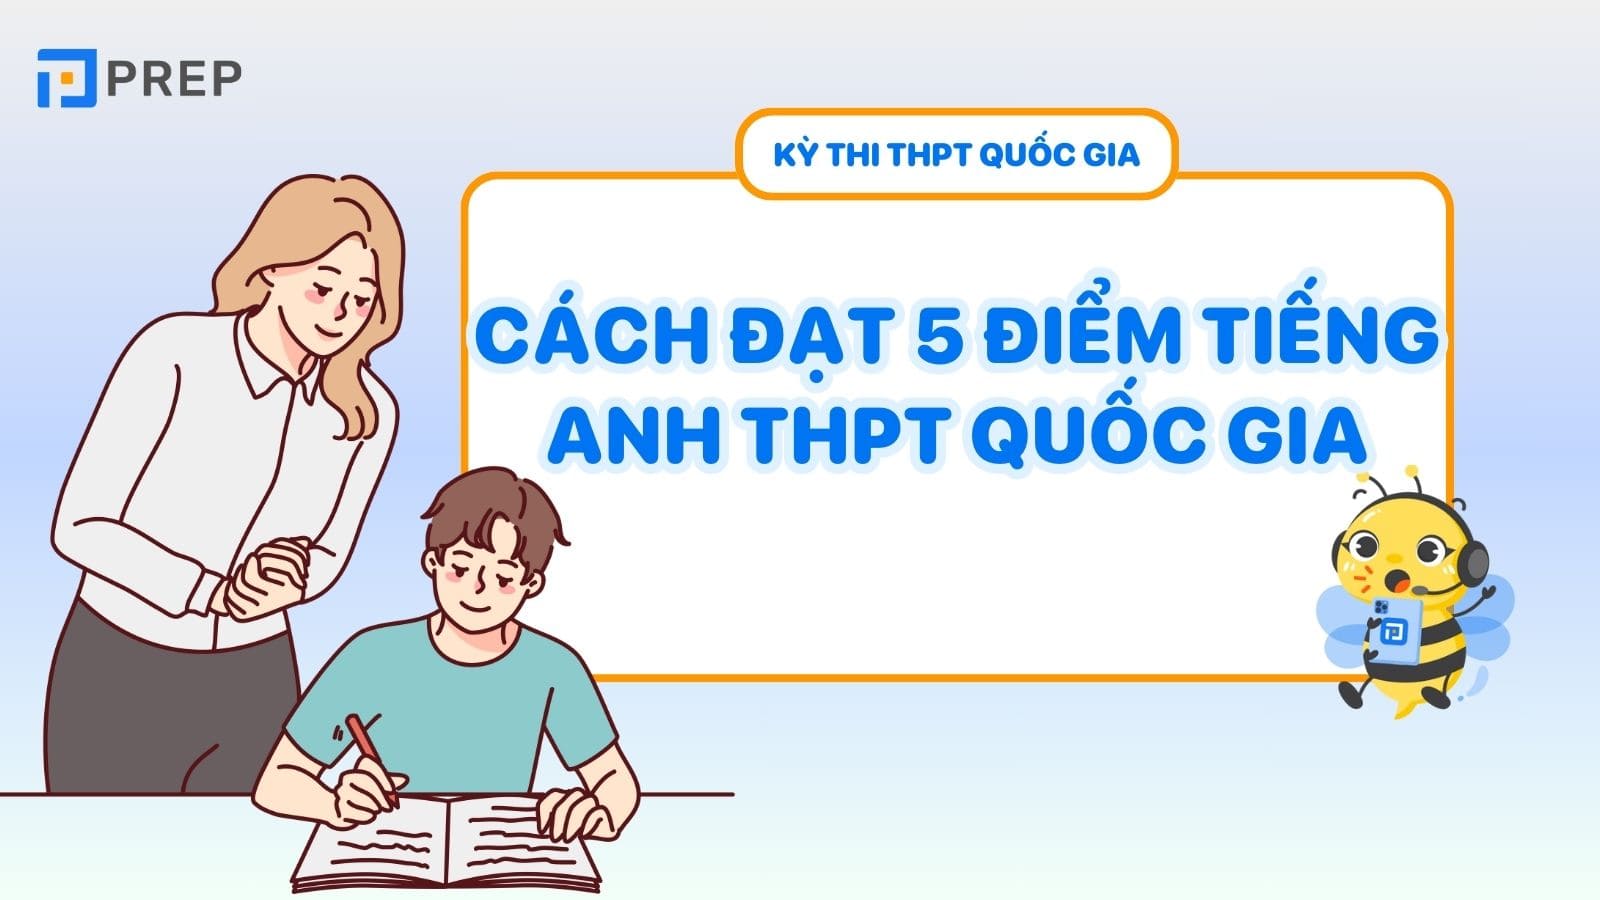 cach-dat-5-diem-tieng-anh-thpt-quoc-gia.jpg